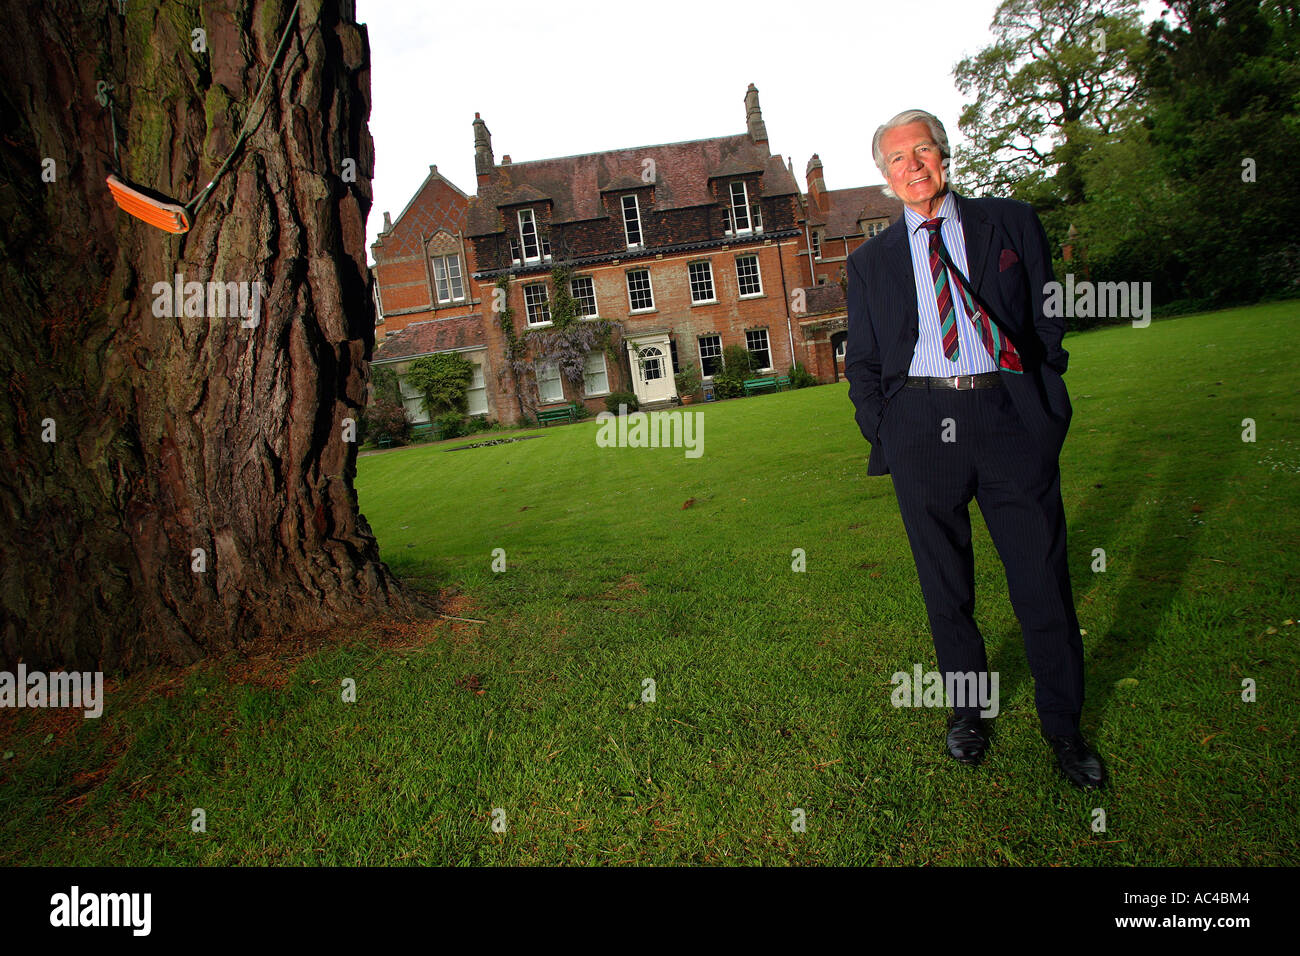 Lord William Coleridge in the grounds of The Chanter's House, Ottery St Mary in Devon UK Stock Photo